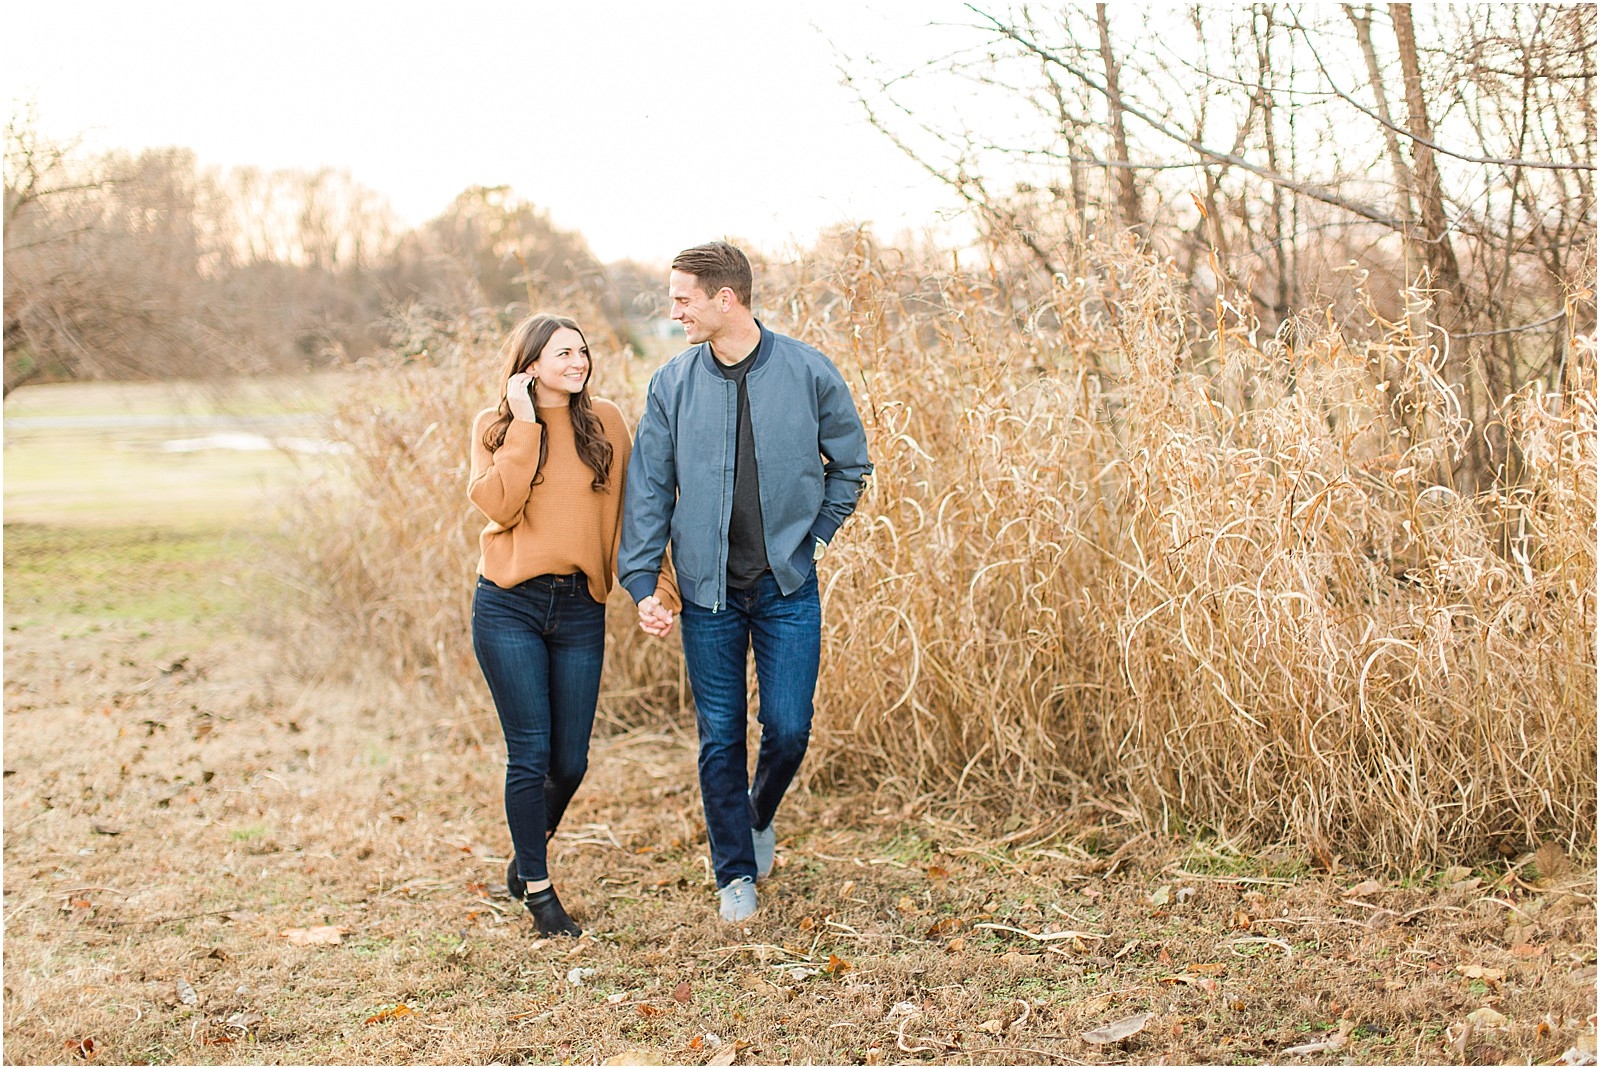 Kaley and Devon's fall Evansville Indiana engagement session. | #fallengagementsession #evansvilleindiana #evansvilleindianawedding | 0040.jpg